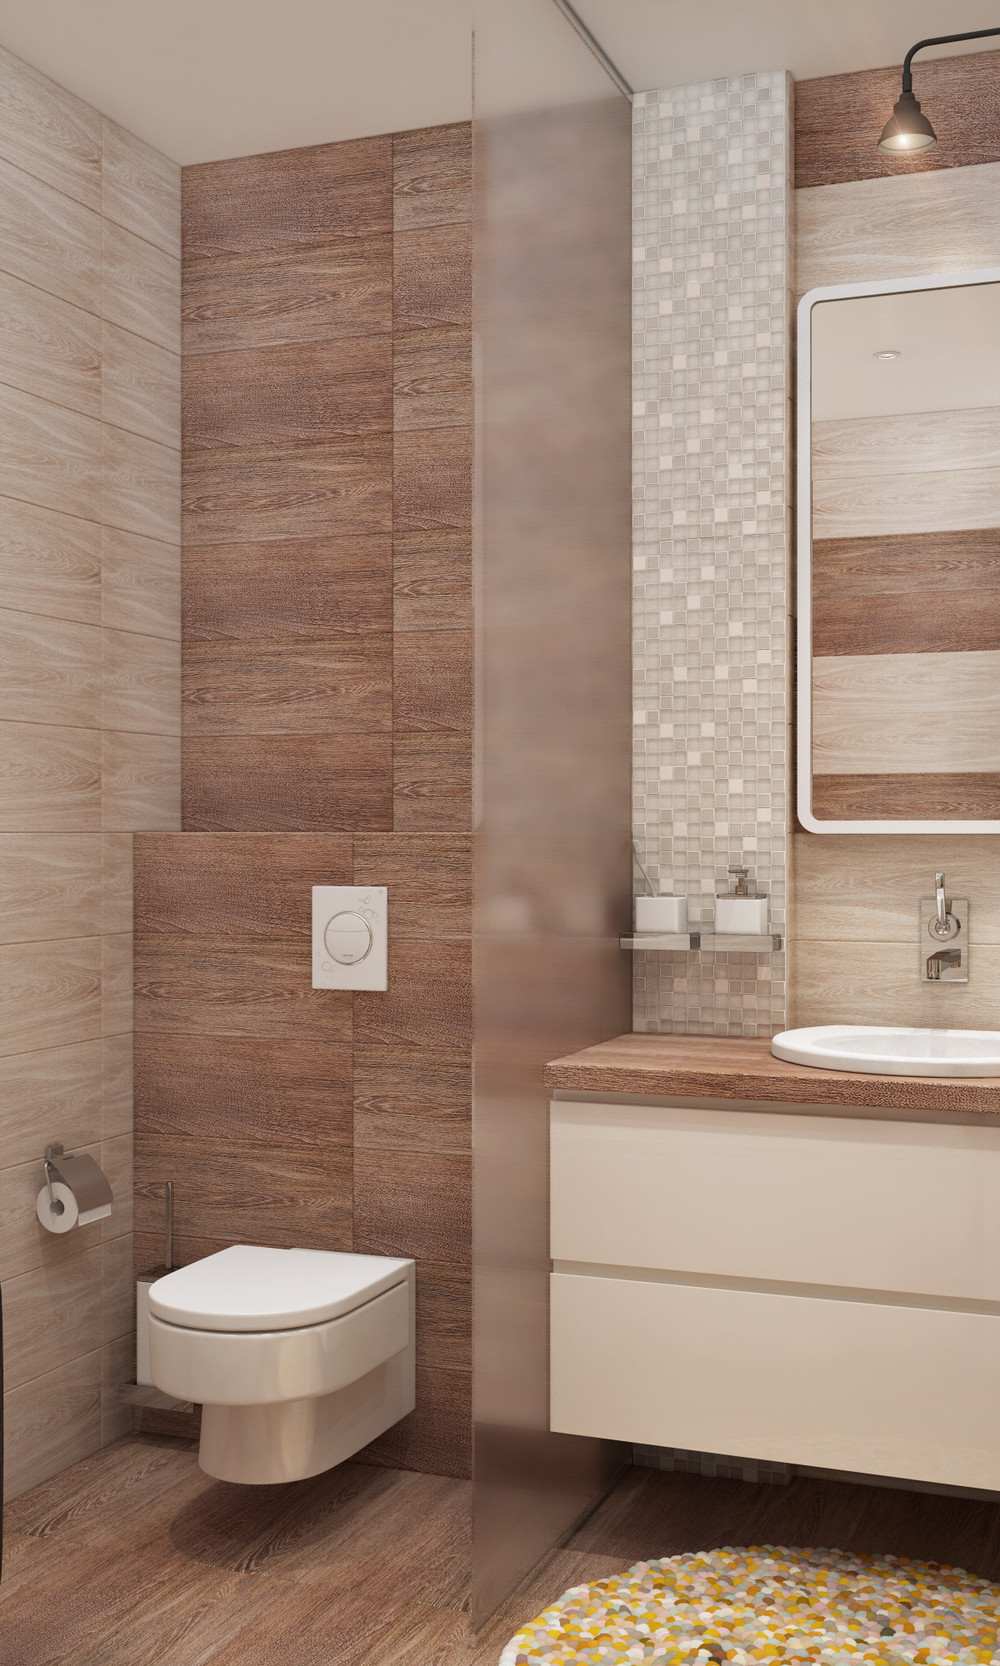 brown tiles bathroom design "width =" 1000 "height =" 1666 "srcset =" https://mileray.com/wp-content/uploads/2020/05/1588515988_622_Simple-and-Minimalist-Design-For-Decorating-Small-Bathroom-Ideas-Will.jpg 1000w, https: / /mileray.com/wp-content/uploads/2016/09/Design-Studio-Mango-2-180x300.jpg 180w, https://mileray.com/wp-content/uploads/2016/09/Design-Studio- Mango-2-768x1279.jpg 768w, https://mileray.com/wp-content/uploads/2016/09/Design-Studio-Mango-2-615x1024.jpg 615w, https://mileray.com/wp- content / uploads / 2016/09 / Design-Studio-Mango-2-696x1160.jpg 696w, https://mileray.com/wp-content/uploads/2016/09/Design-Studio-Mango-2-252x420.jpg 252w "sizes =" (maximum width: 1000px) 100vw, 1000px